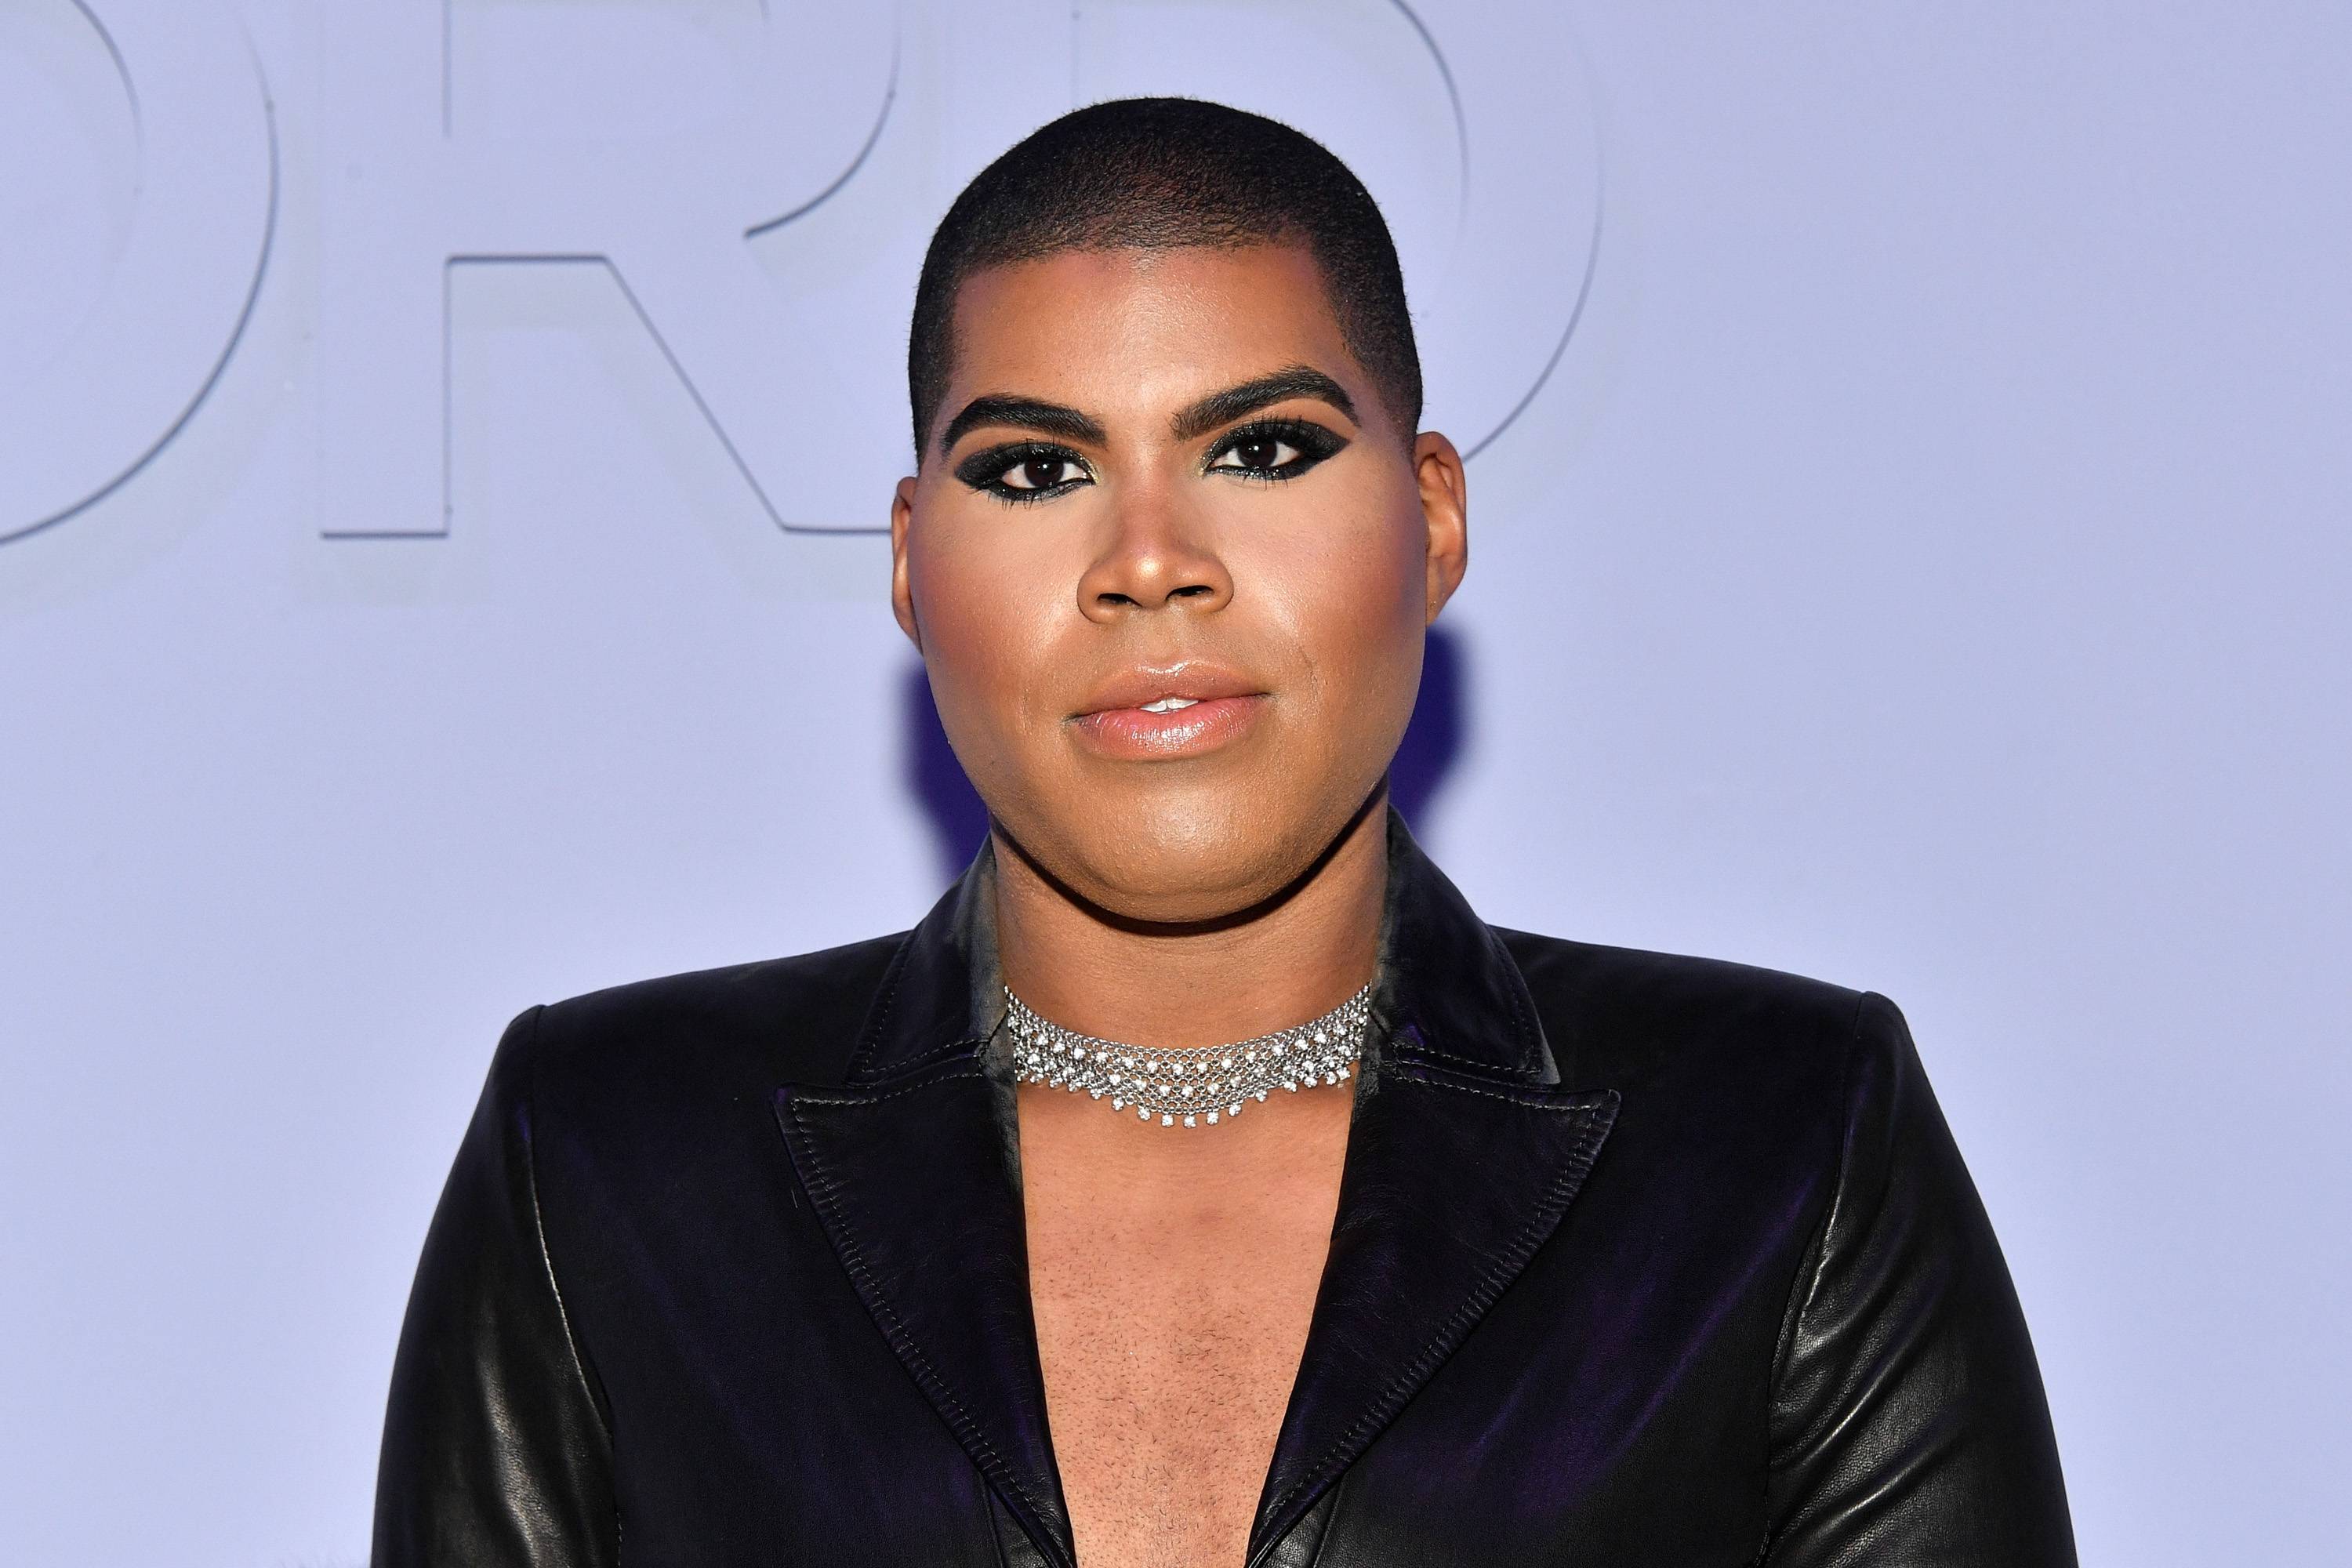 Who is EJ Johnson Currently Dating? Son Of Magic Johnson: What’s The Latest?